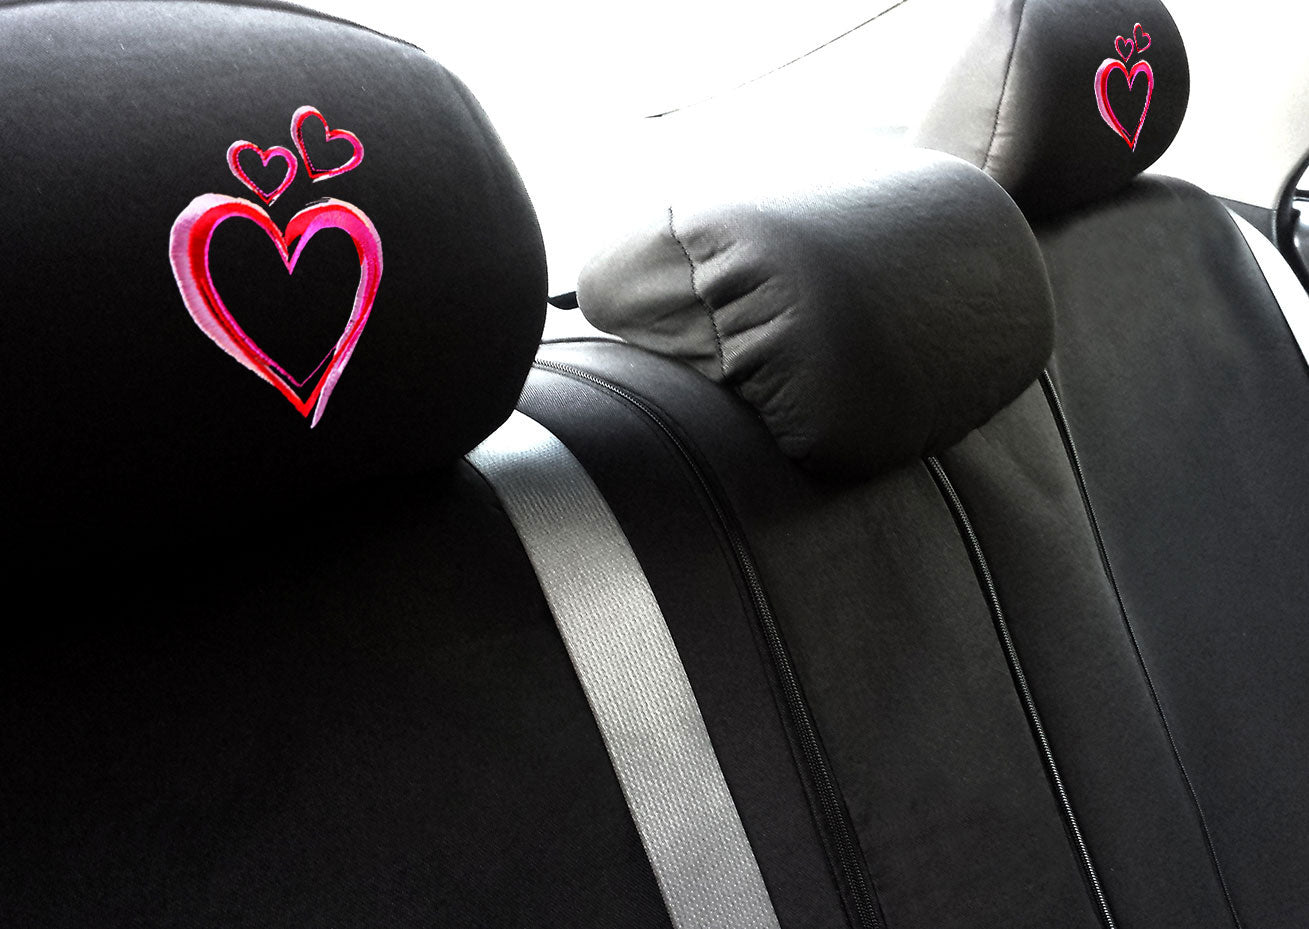 Embroidery Large Pink Heart Design Auto Truck SUV Car Seat Headrest Cover Accessory 1 Piece - Yupbizauto